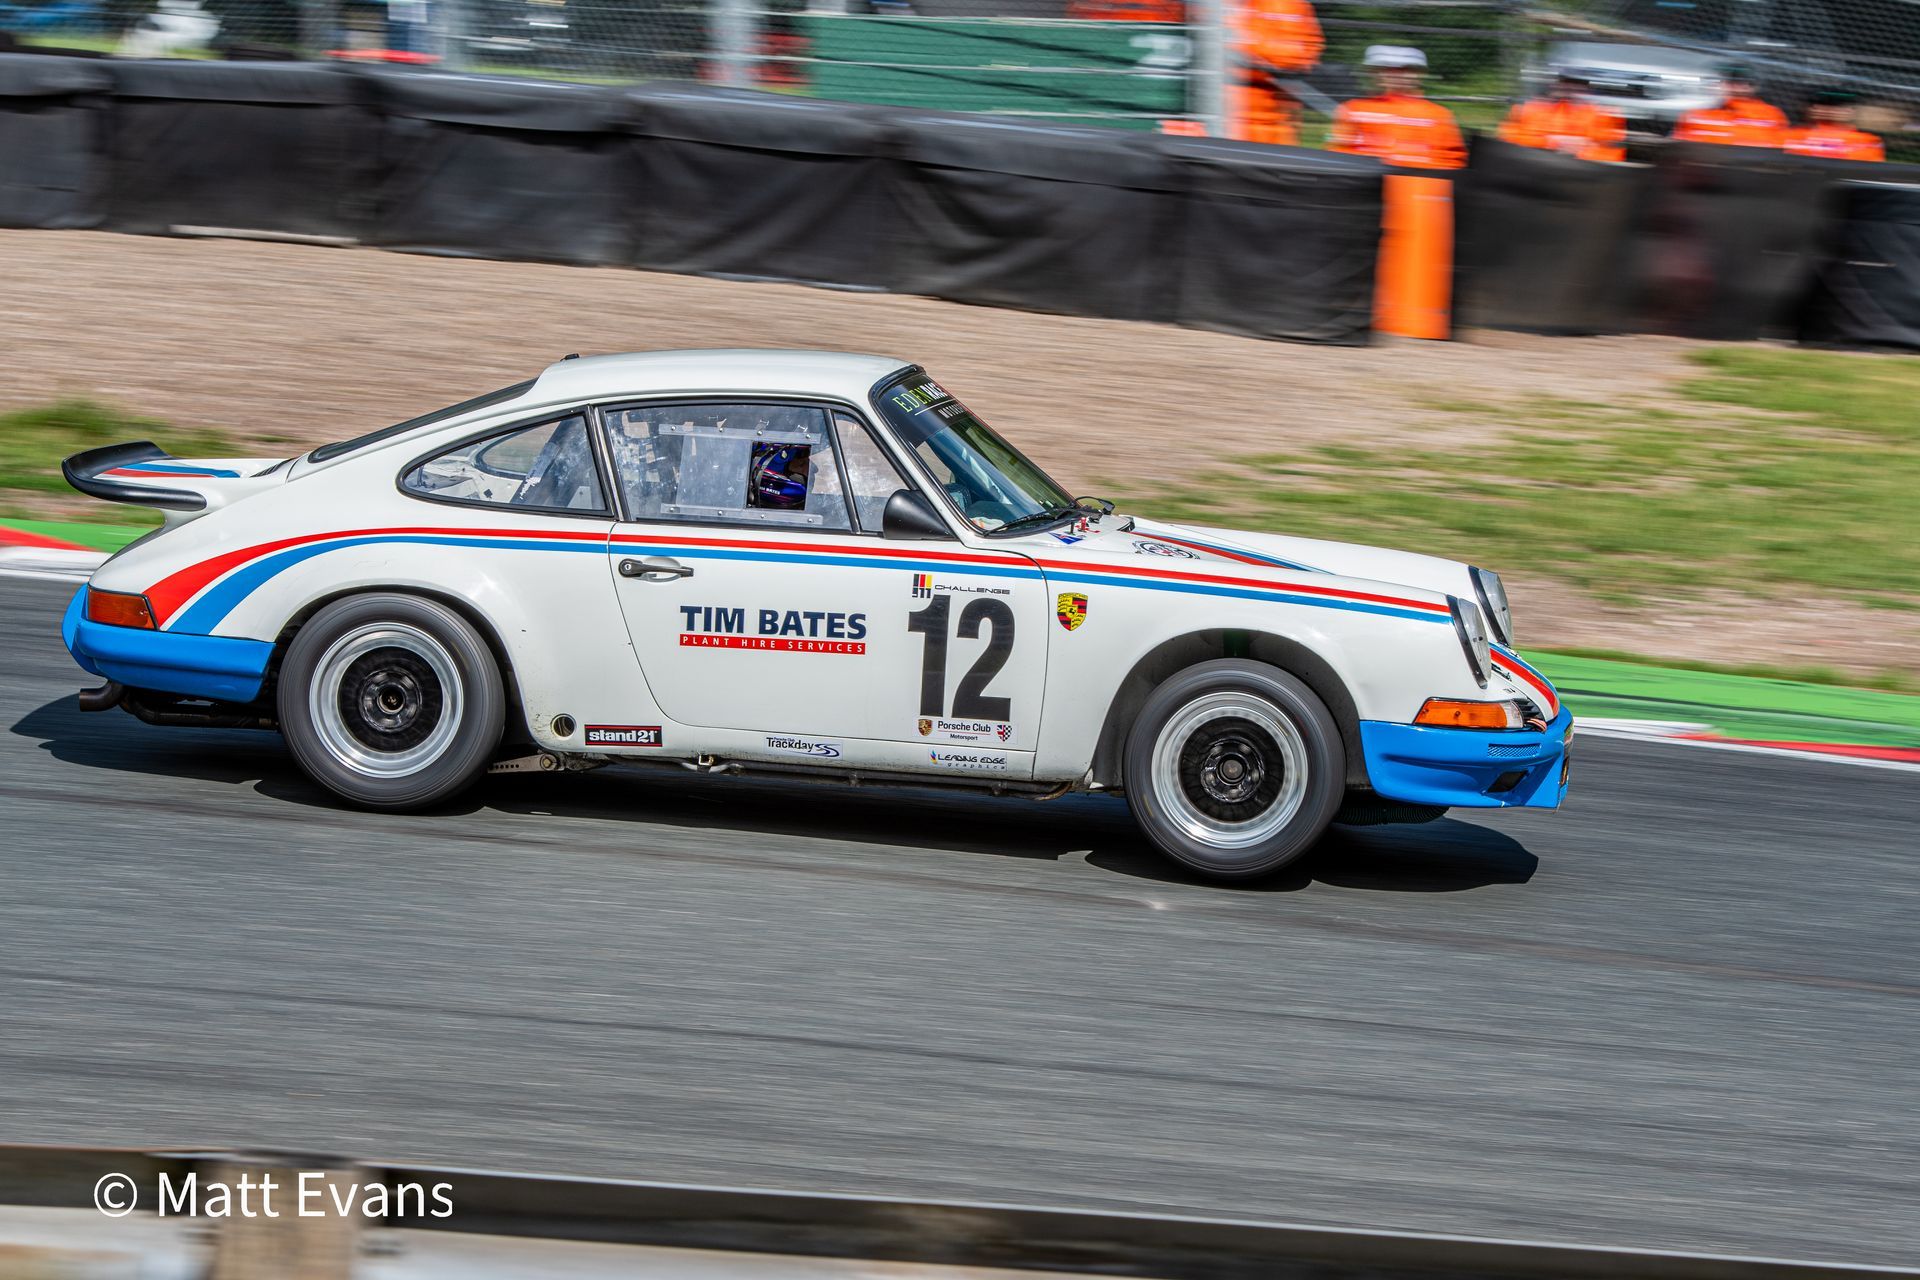 Porsche 911 racing in the 911 challenge at Oulton Park